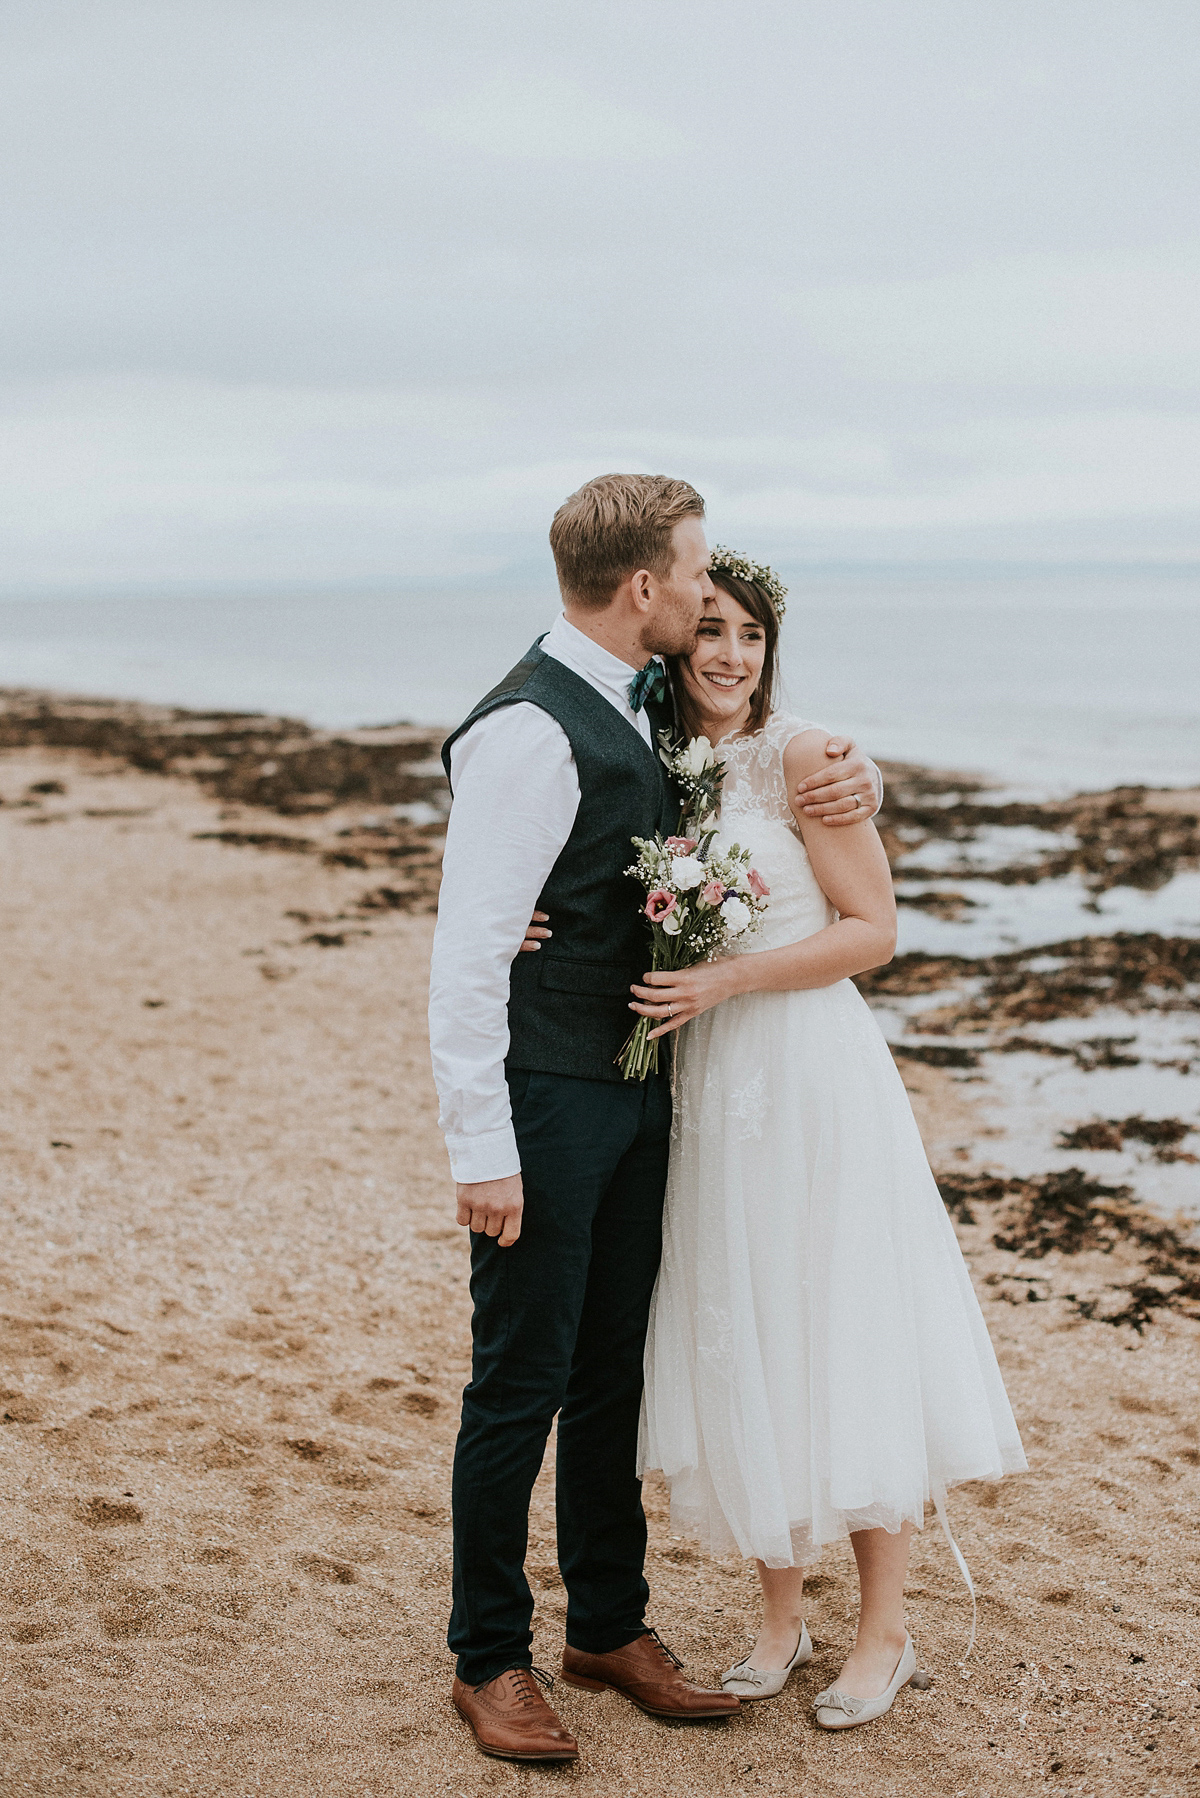 lovely wedding by the sea 26 1